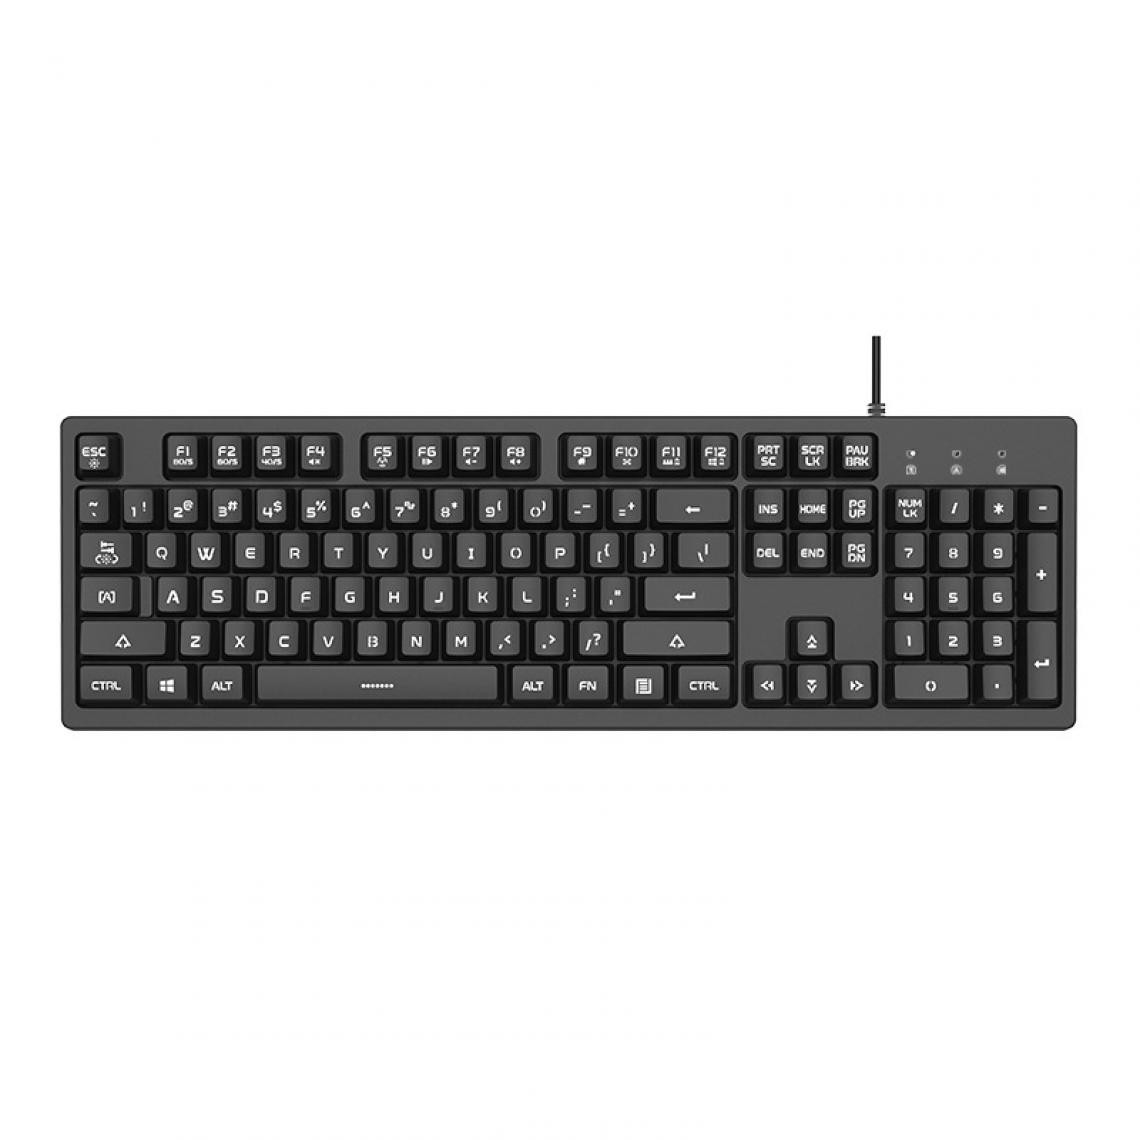 Generic - Clavier mécanique lumineux Tea Axis Hand Feeling Computer Office Game Keyboard - Clavier